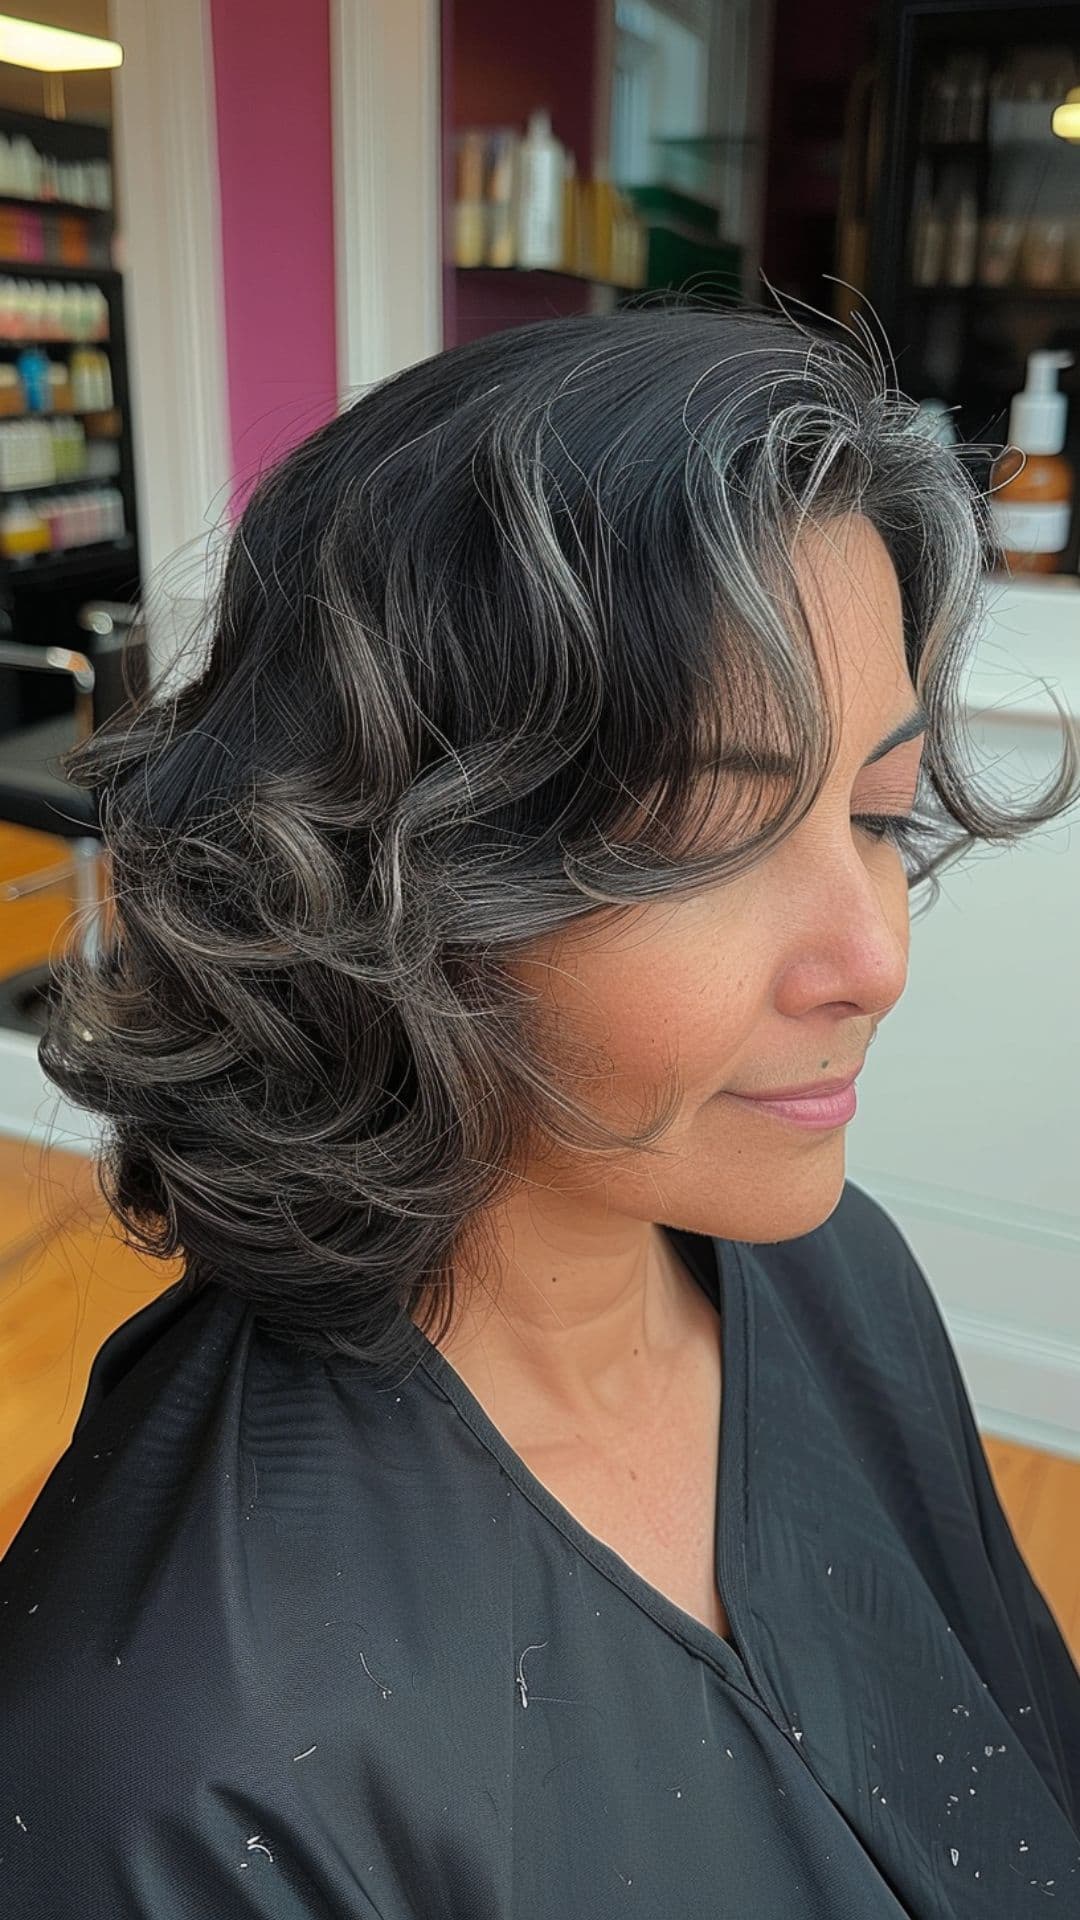 An older woman modelling classic lob with vintage waves hairstyle.